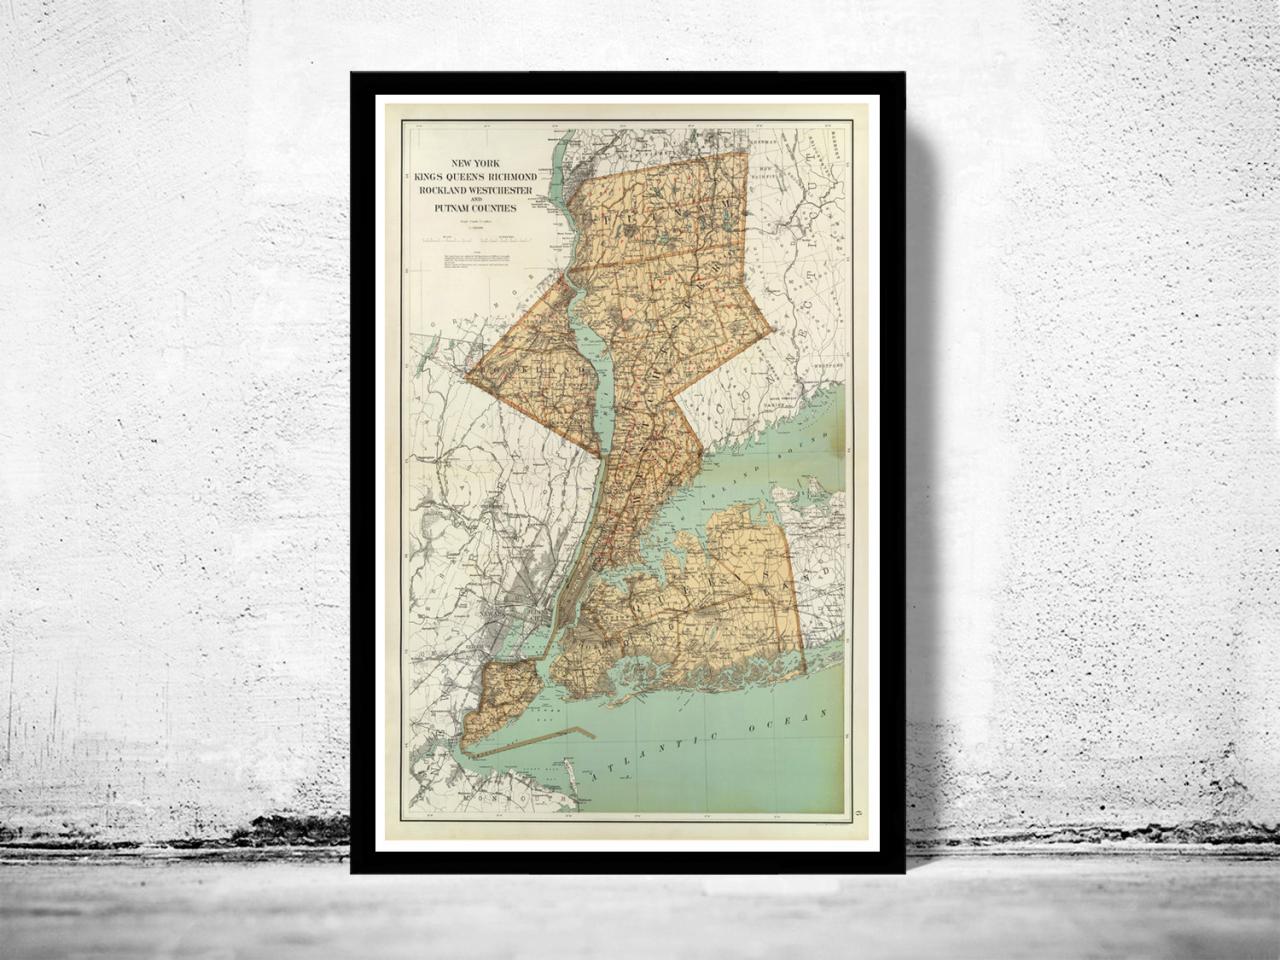 Old Map of New York County 1895 Dutchess, Kings, Queens, Richmond, Rockland, Westchester and Putnam